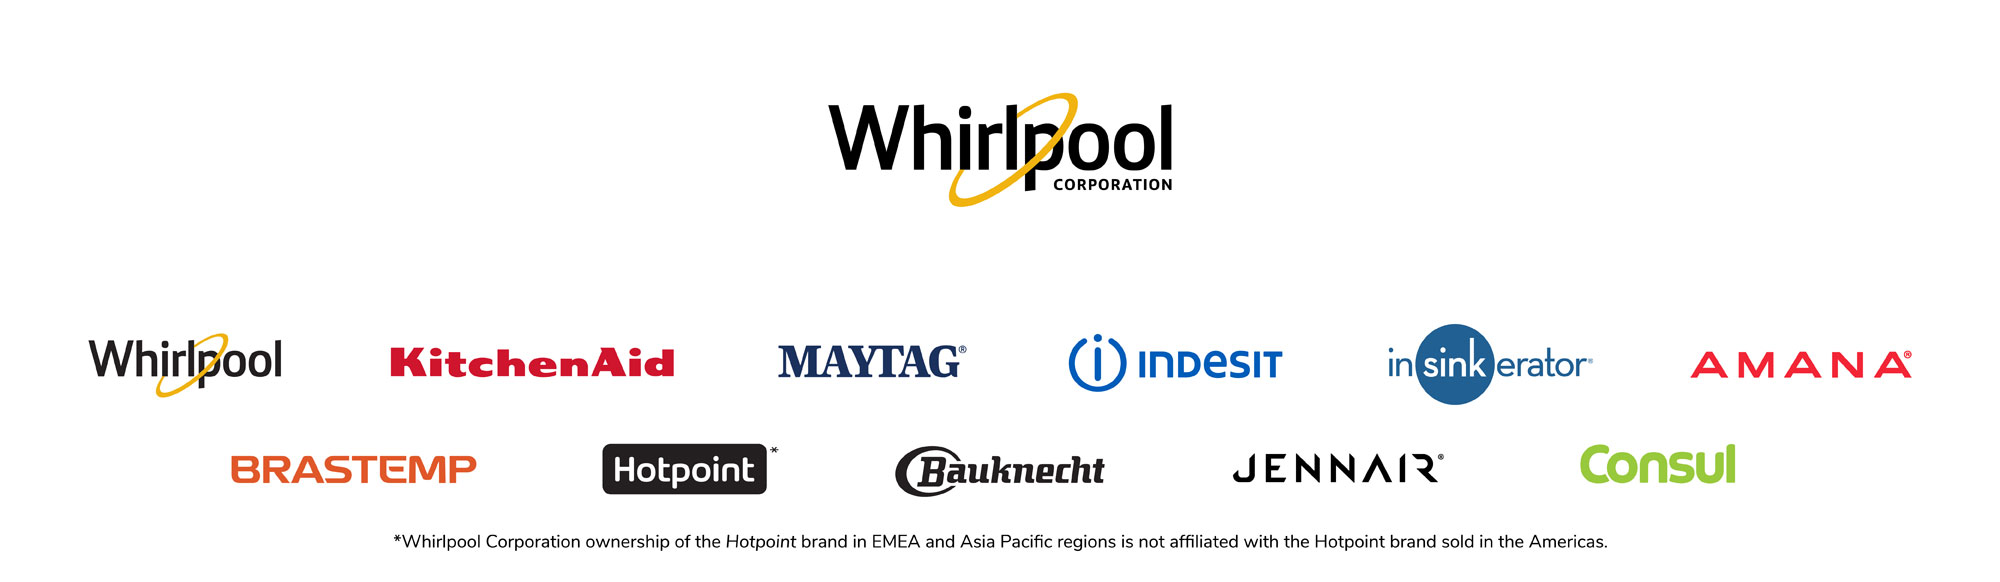 Whirlpool Corporation and its major brand logos